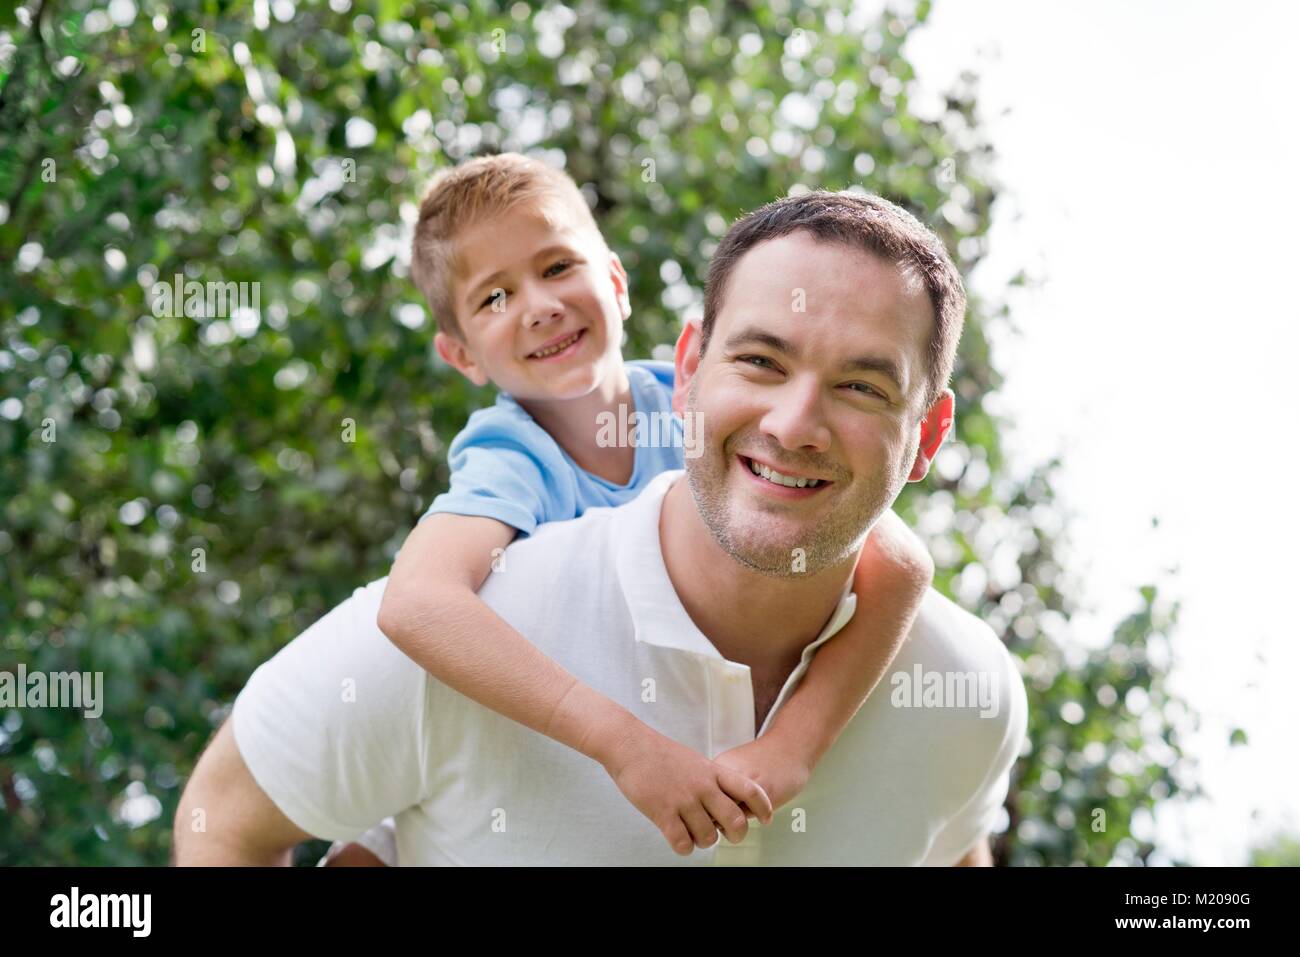 Father giving son piggy back. Stock Photo